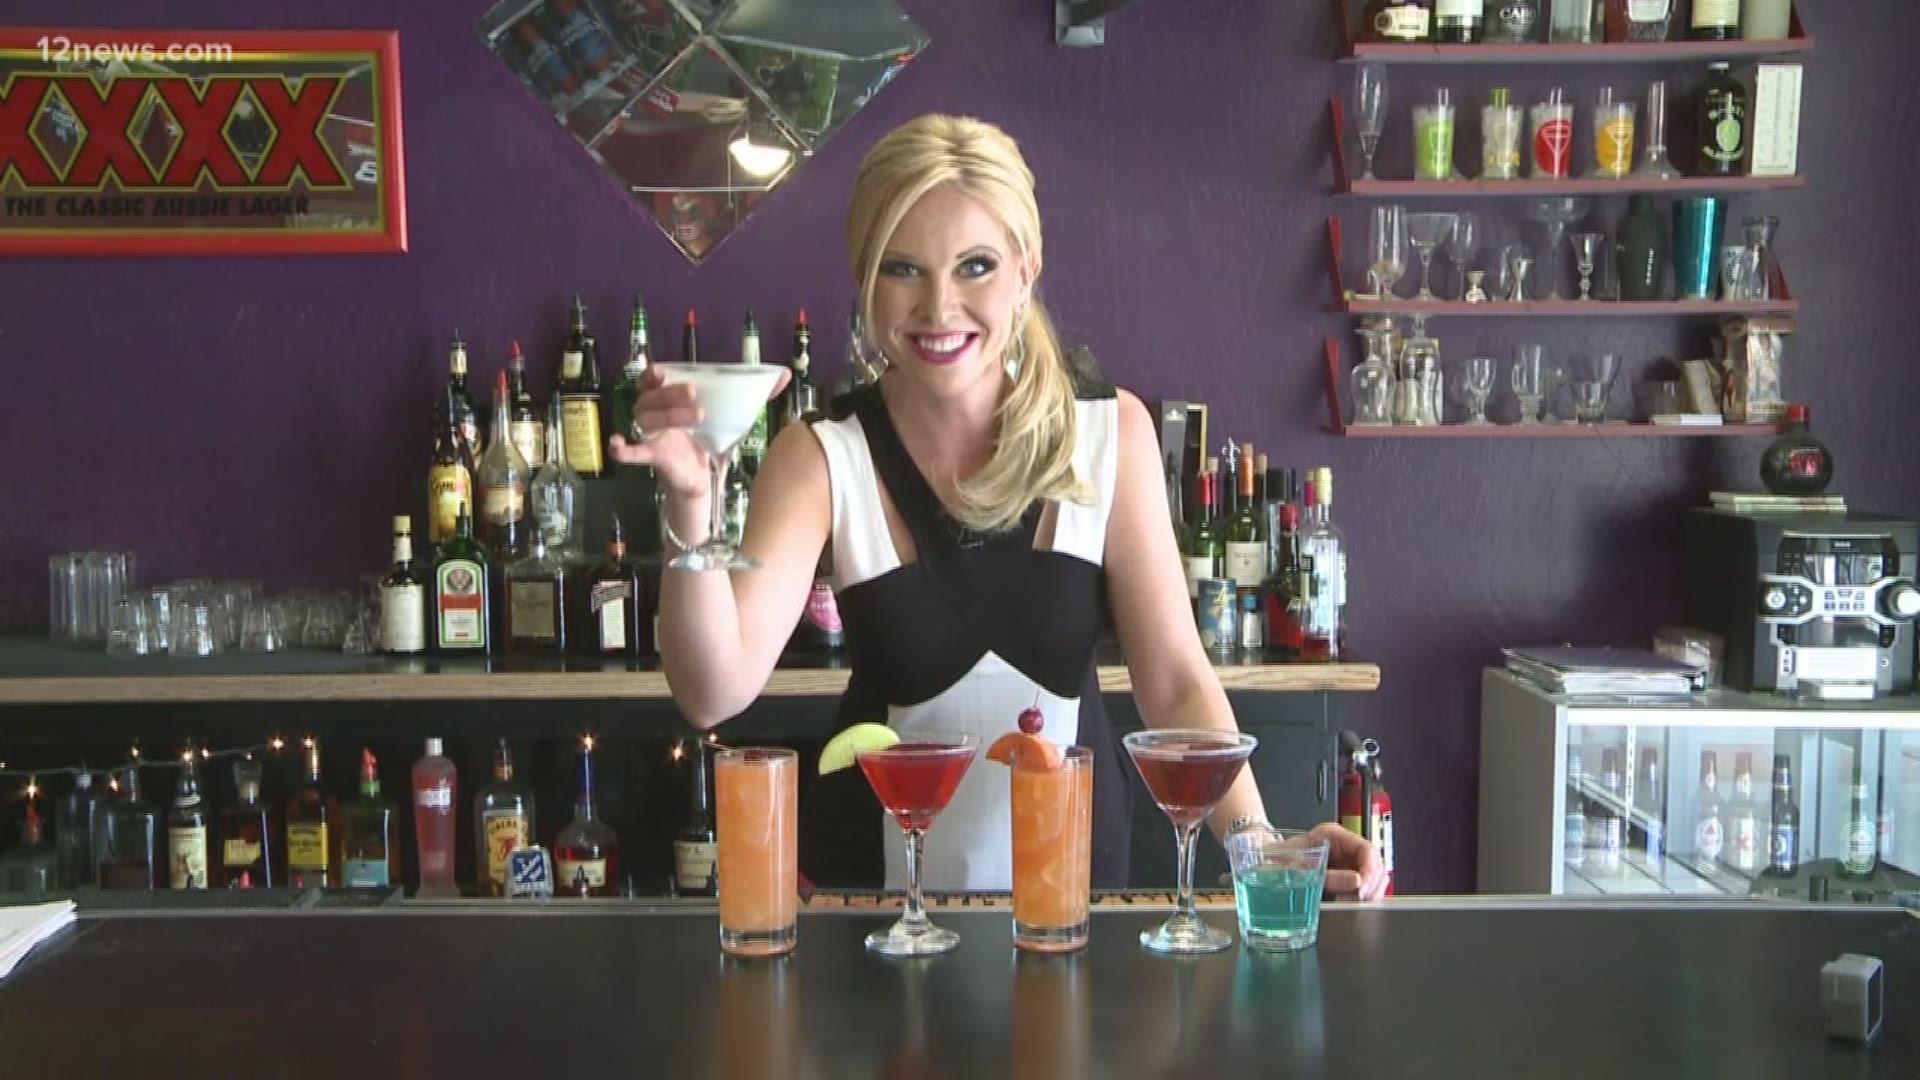 Et kors Kent Diktat Everywhere A to Z: Mix it up and learn to be a bartender | 12news.com